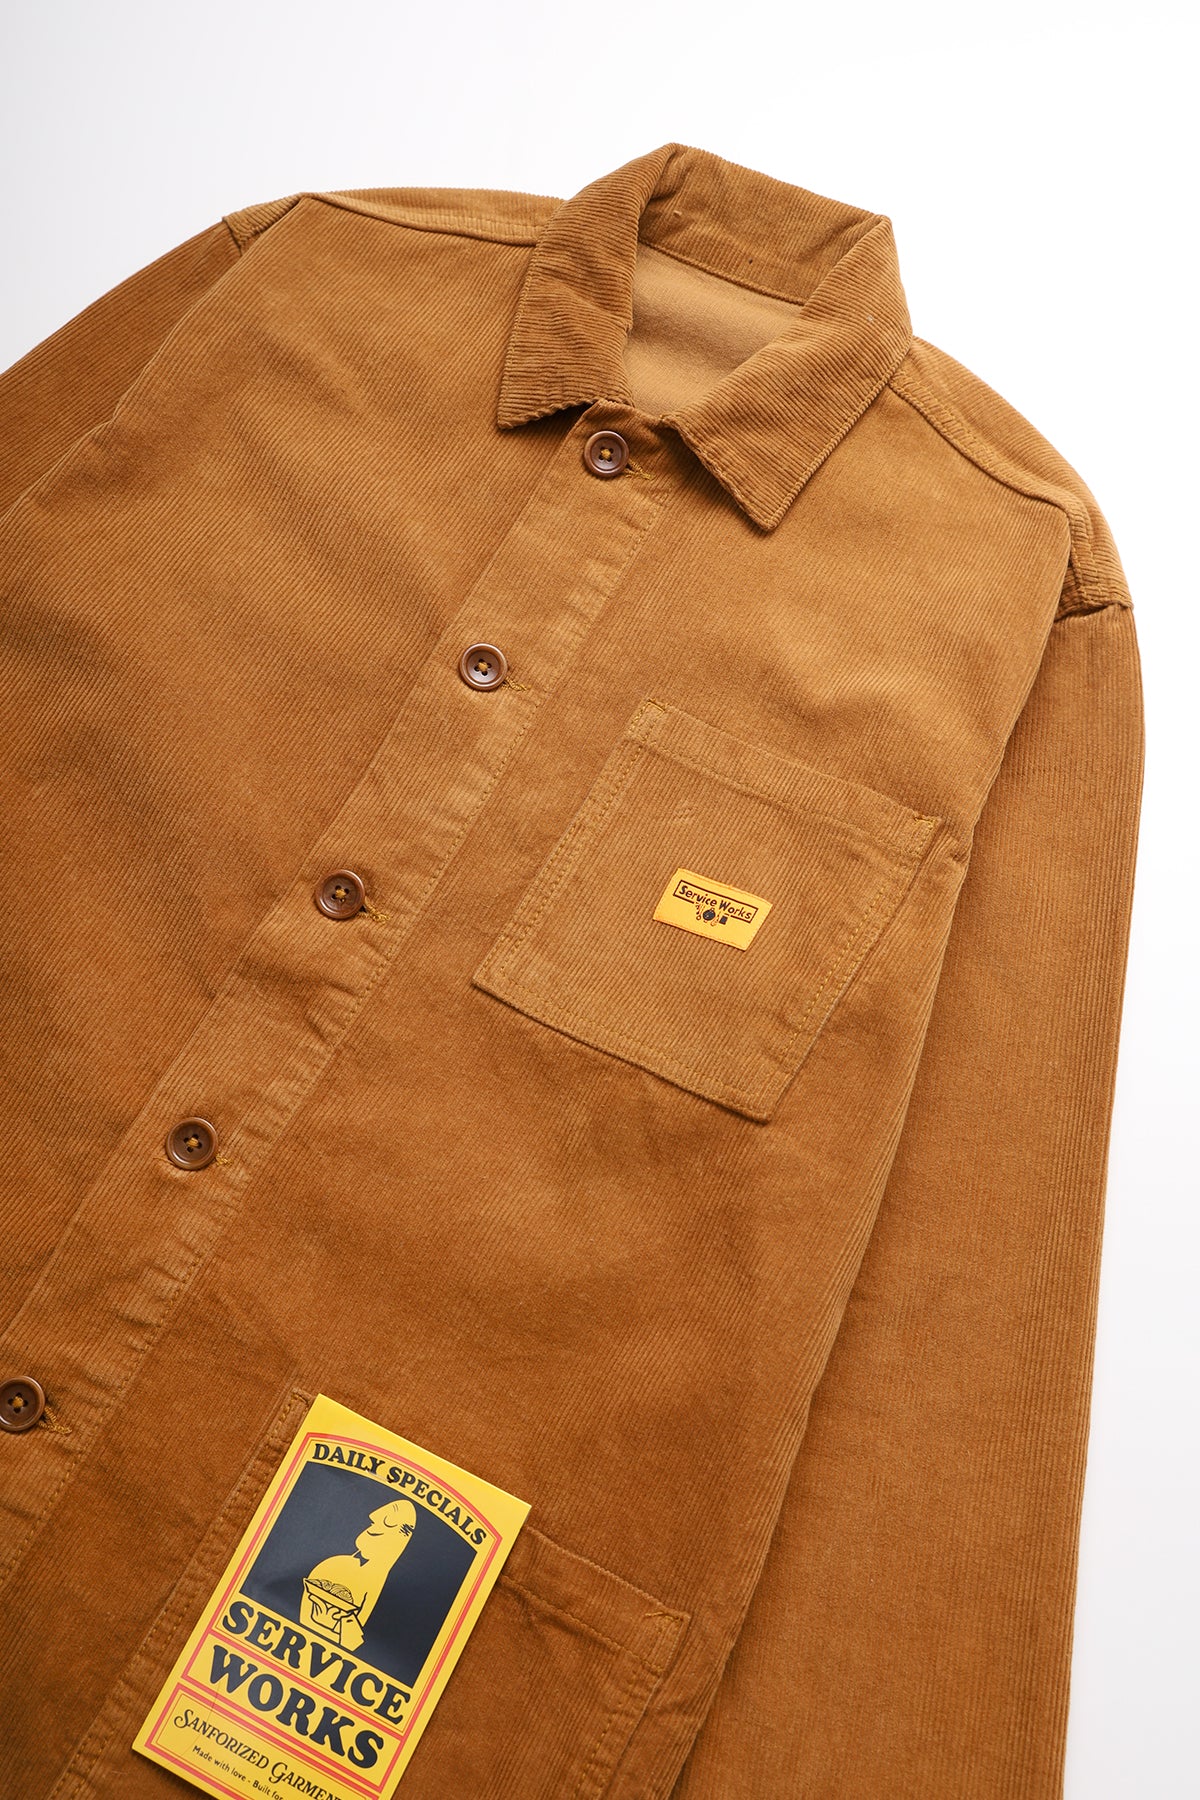 Service Works - Corduroy Coverall Jacket - Pecan